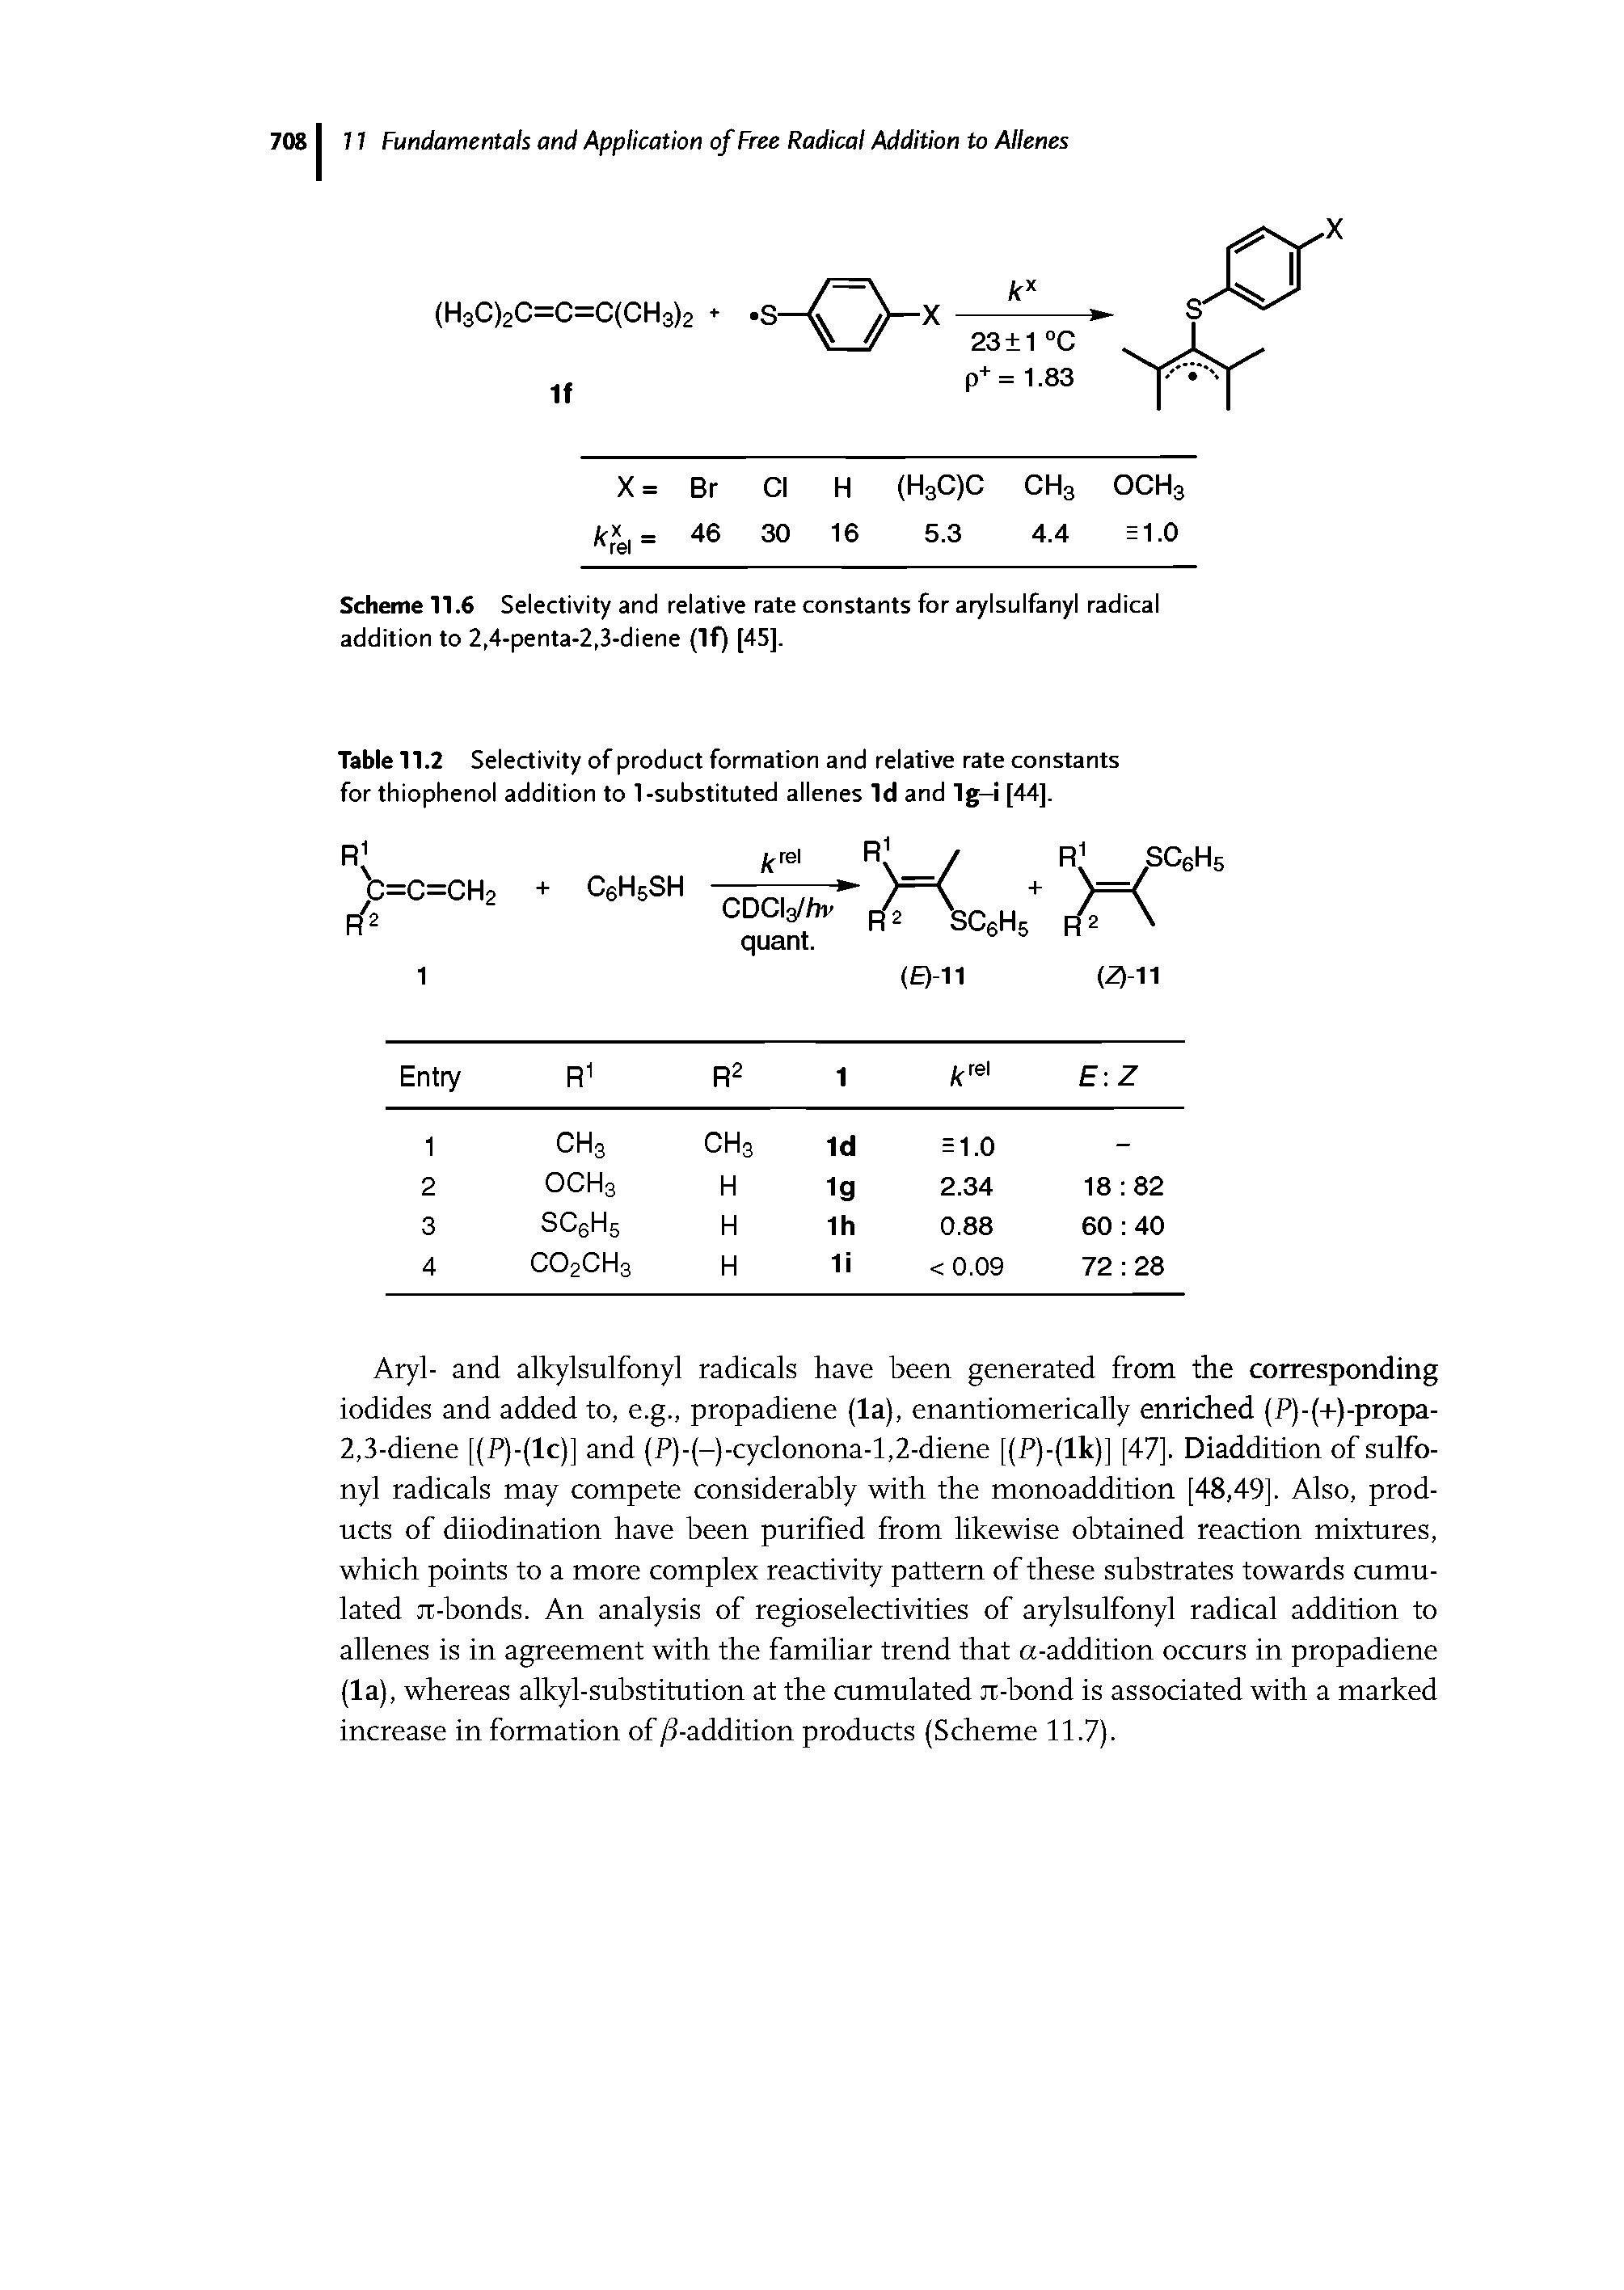 Scheme 11.6 Selectivity and relative rate constants for arylsulfanyl radical addition to 2,4-penta-2,3-diene (If) [45],...